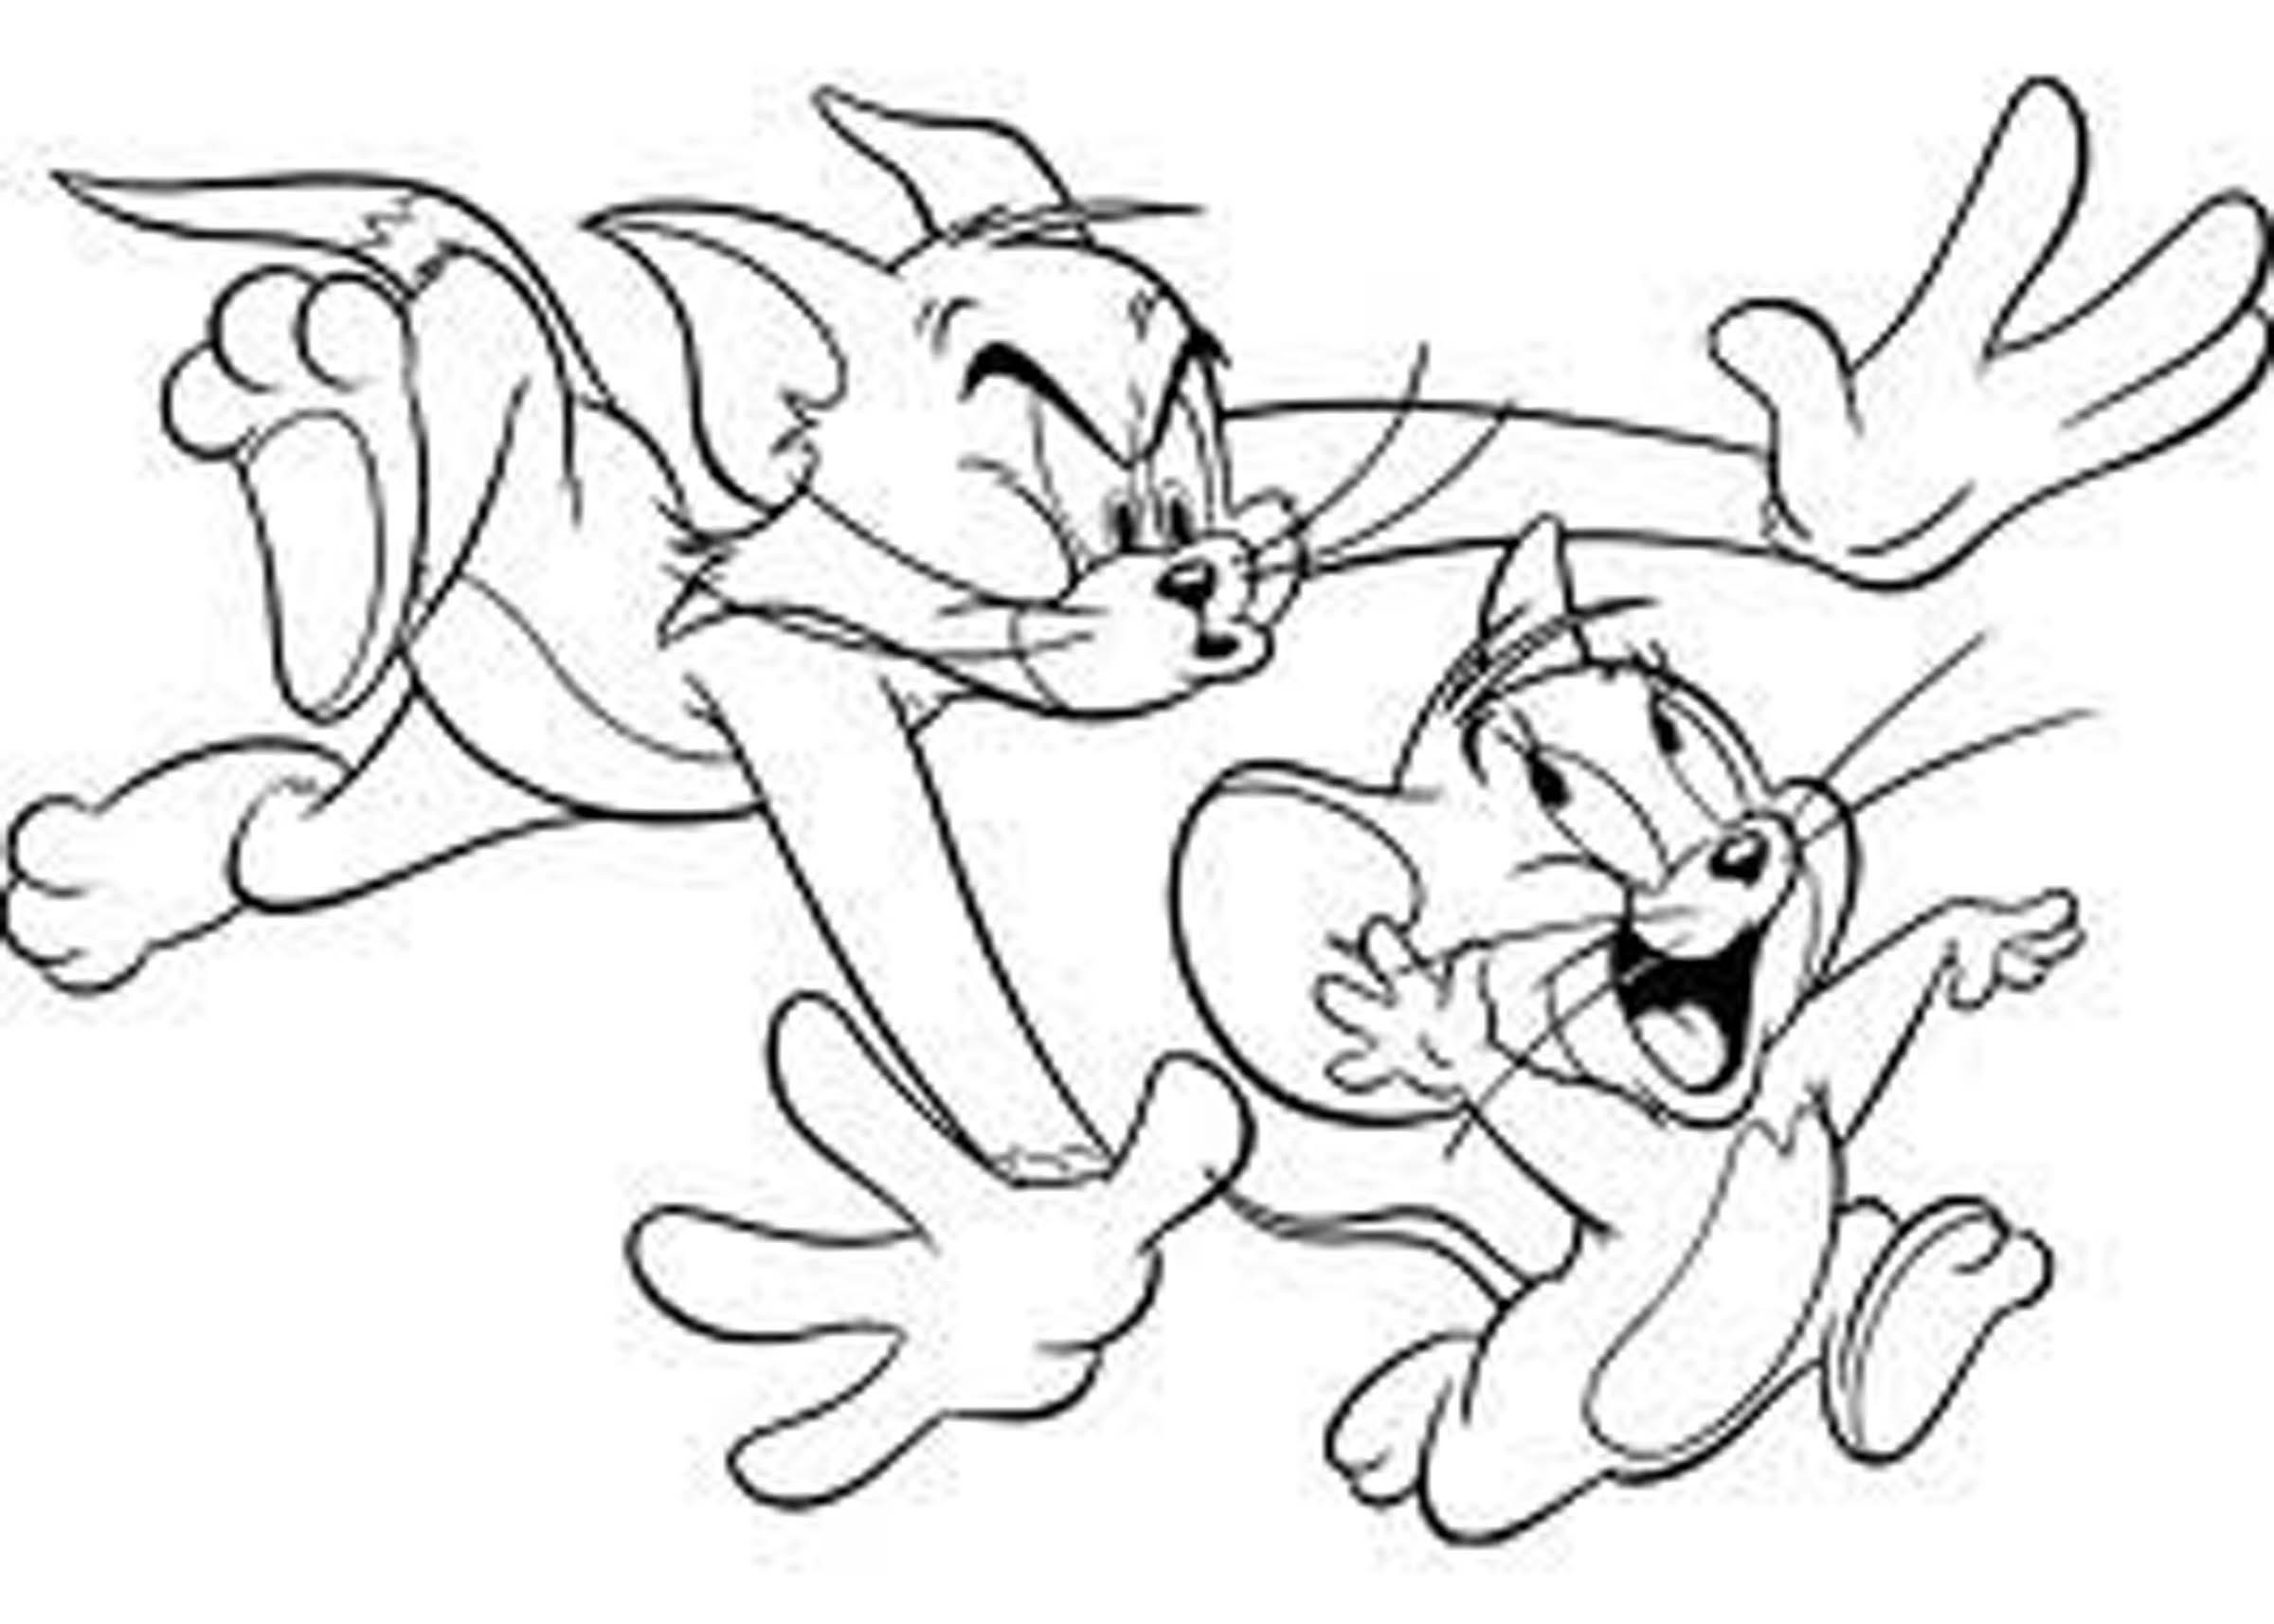 Drawings Tom and Jerry (Cartoons) – Printable coloring pages